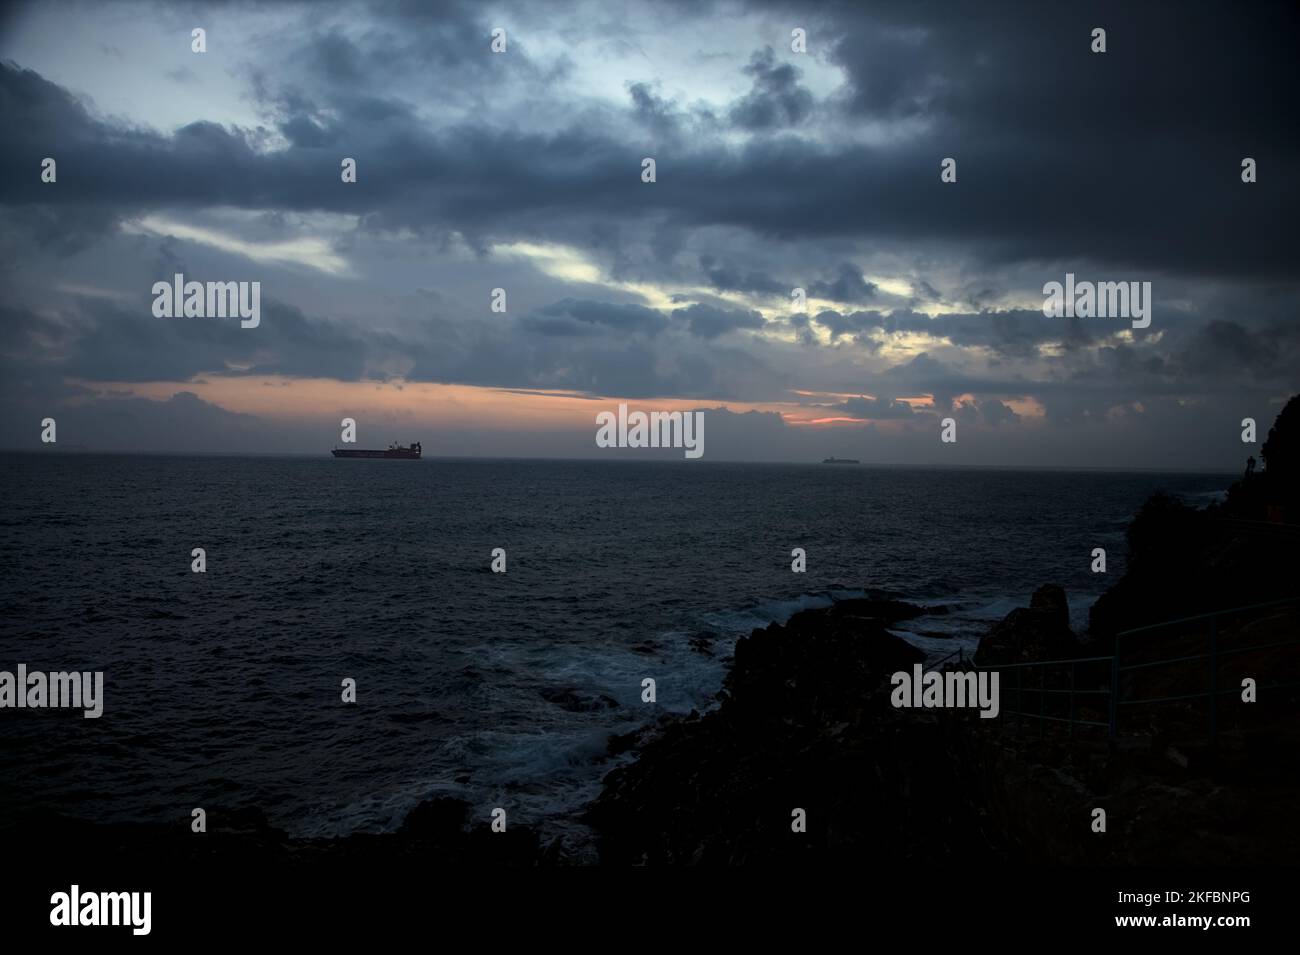 Sea  on a cloudy day at dusk with a cargo ship on the horizon Stock Photo